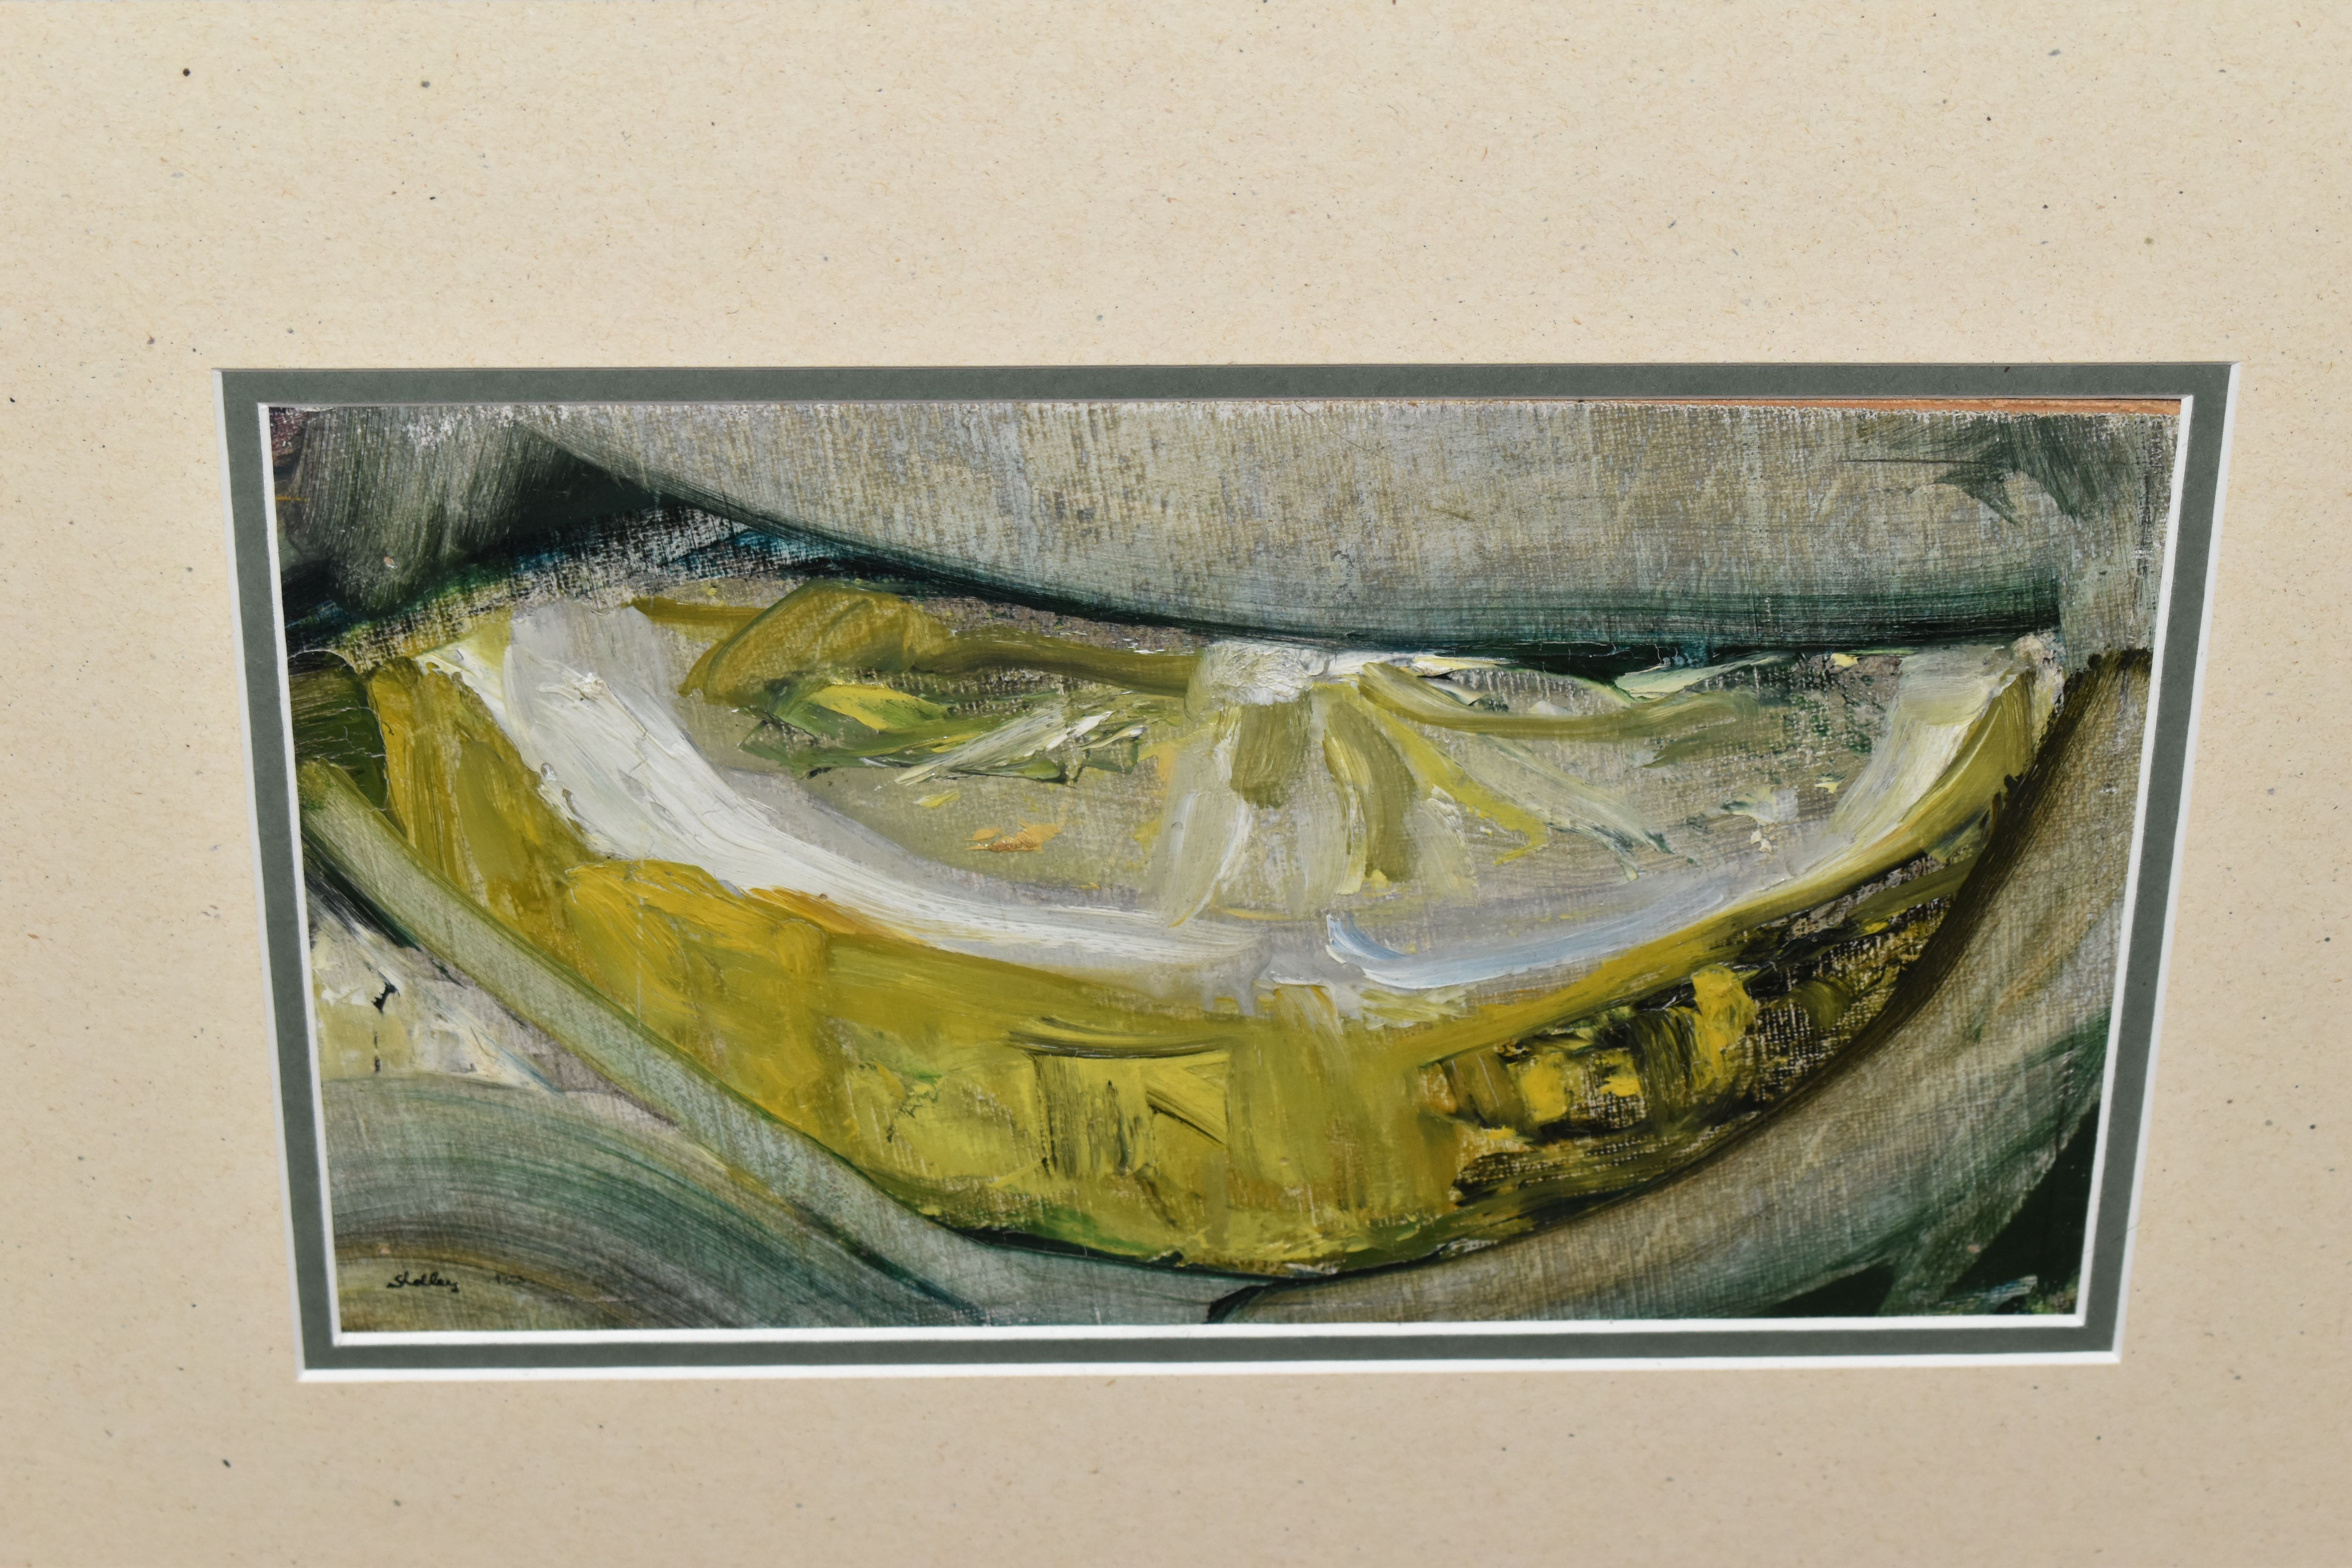 TIMOTHY SHELLEY (20TH CENTURY) LEMON SLICE, an abstract study of a slice of lemon, signed and - Image 2 of 4